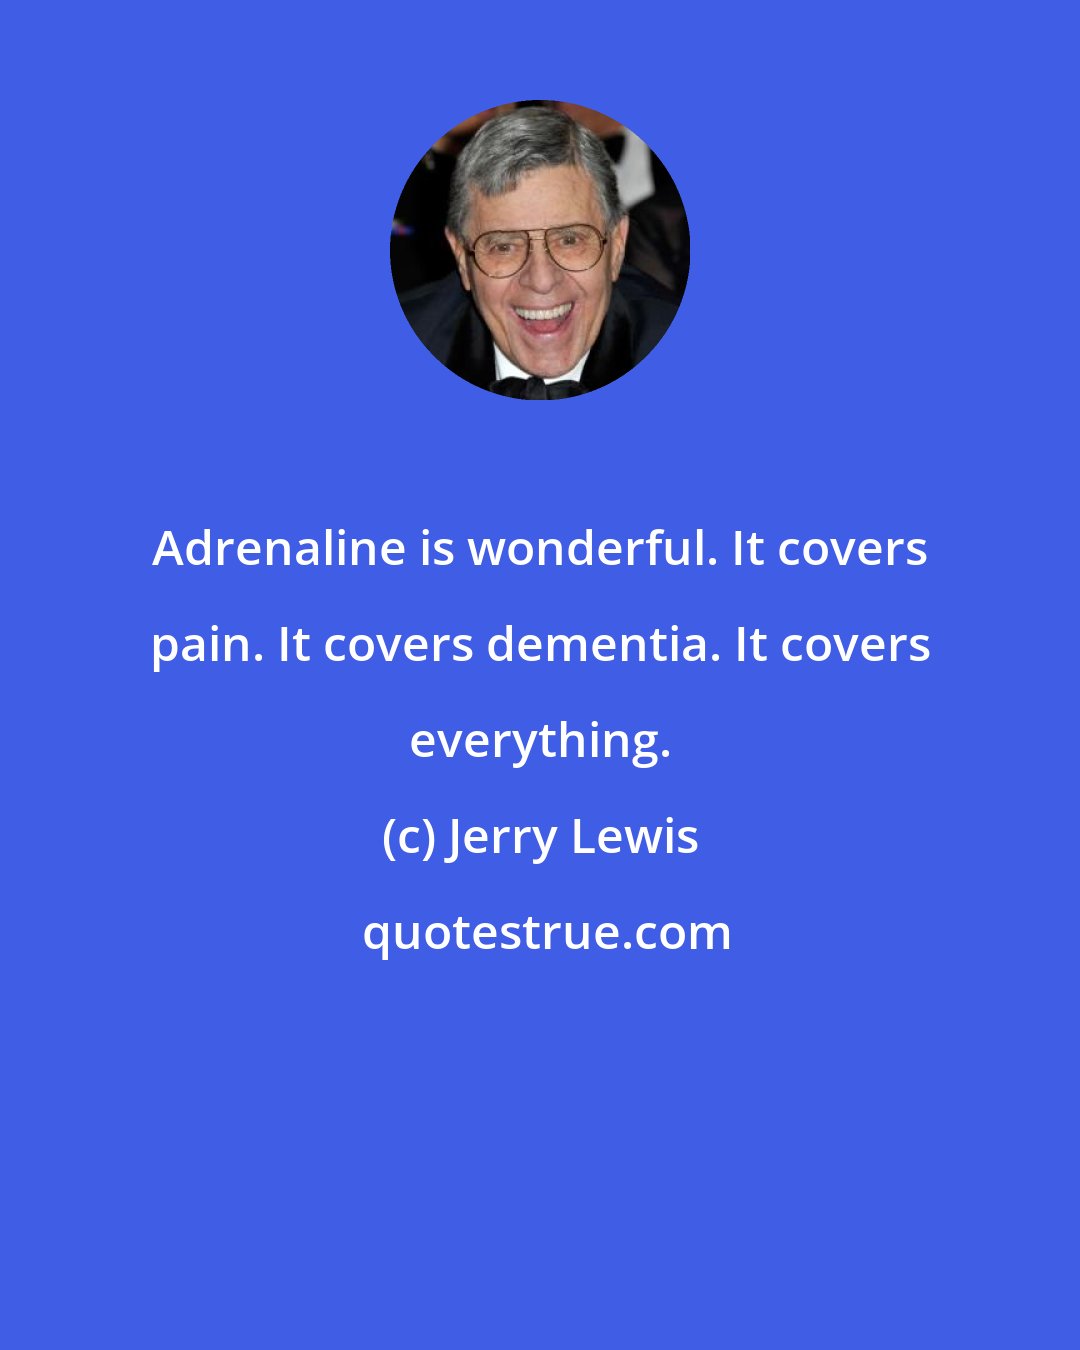 Jerry Lewis: Adrenaline is wonderful. It covers pain. It covers dementia. It covers everything.